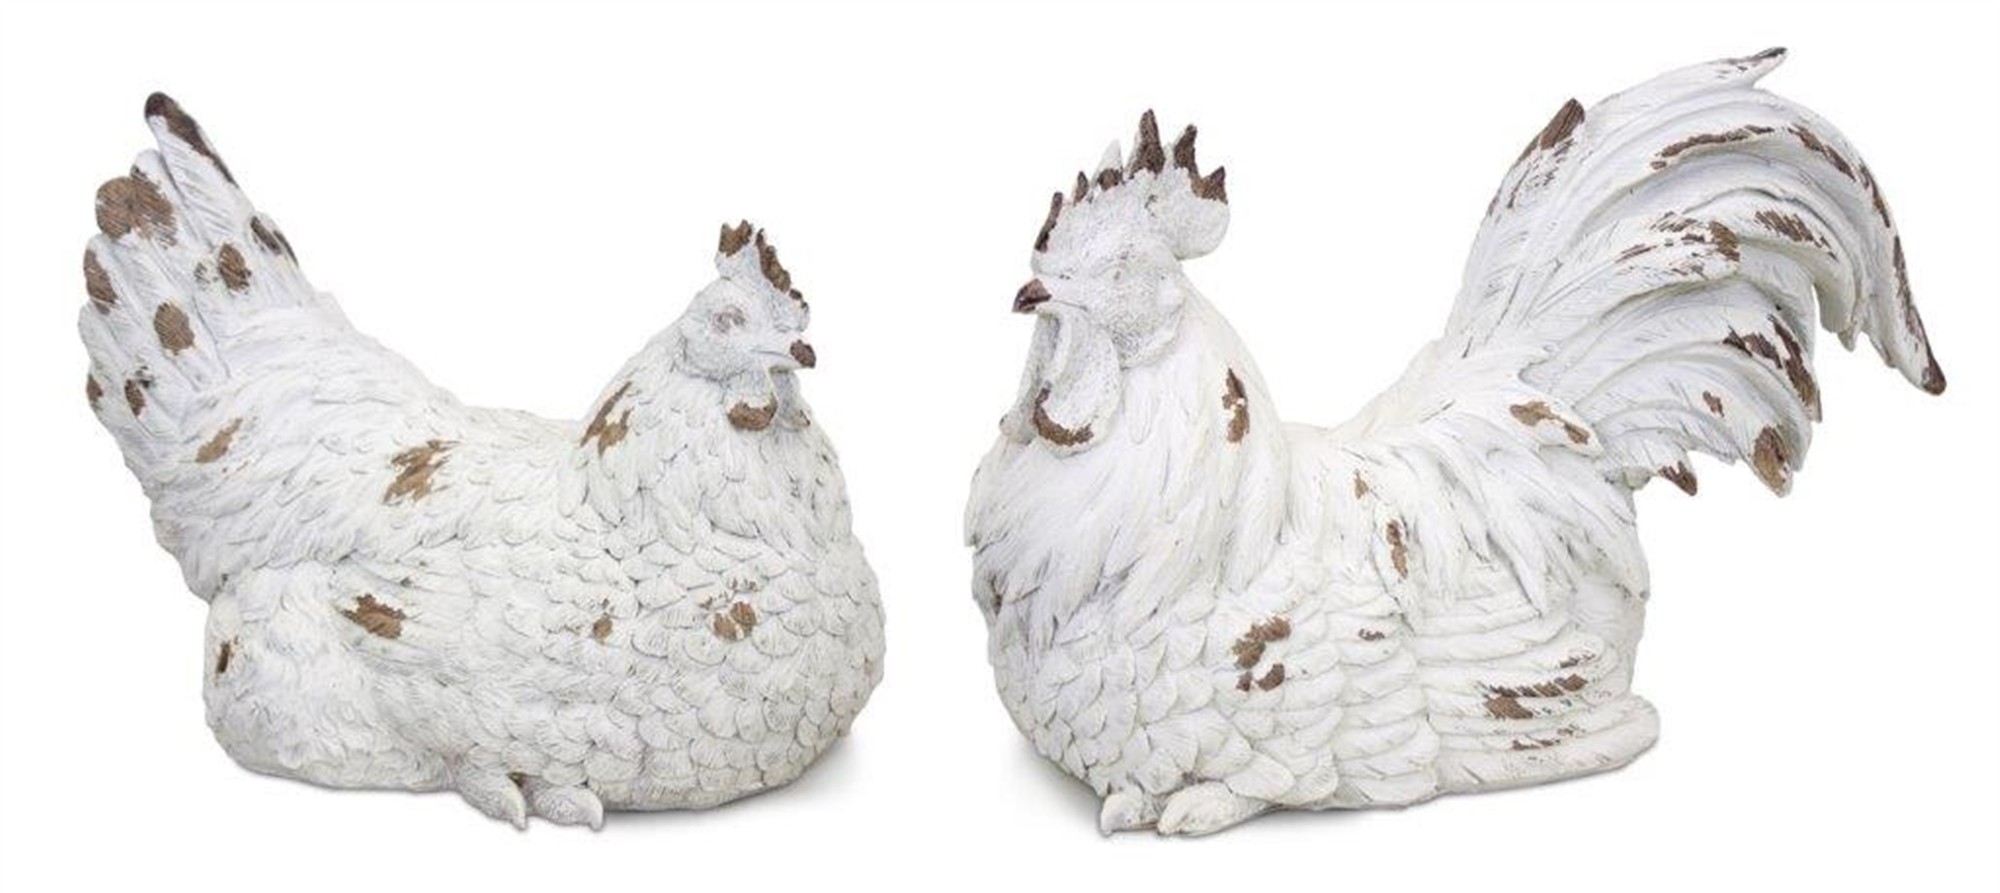 Chicken and Rooster (Set of 2) 11"L x 8"H, 13"L x 8.75"H Resin